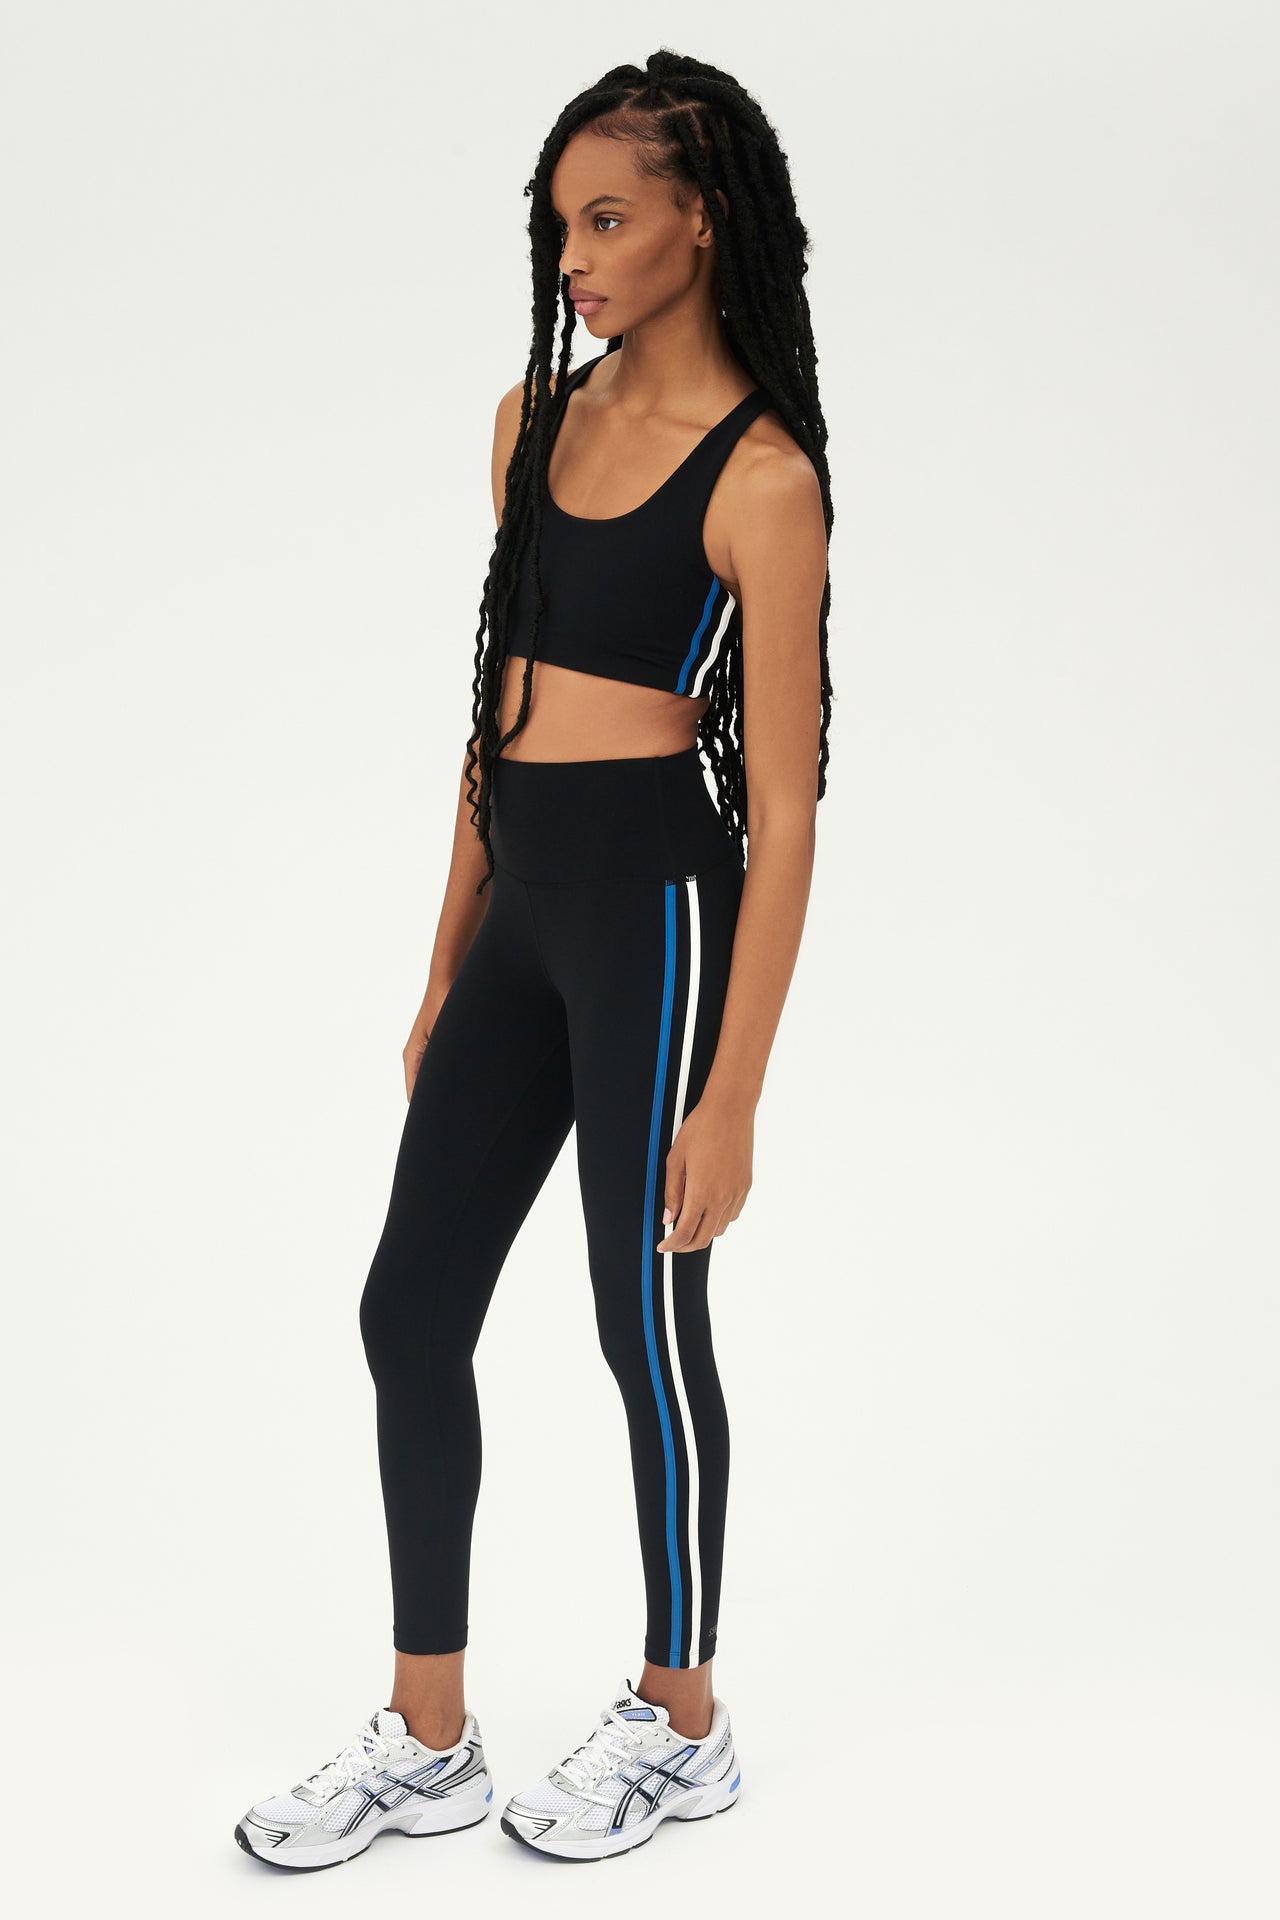 Full side view of girl wearing black sports bra with thin white and blue stripes down the side and black leggings with white shoes